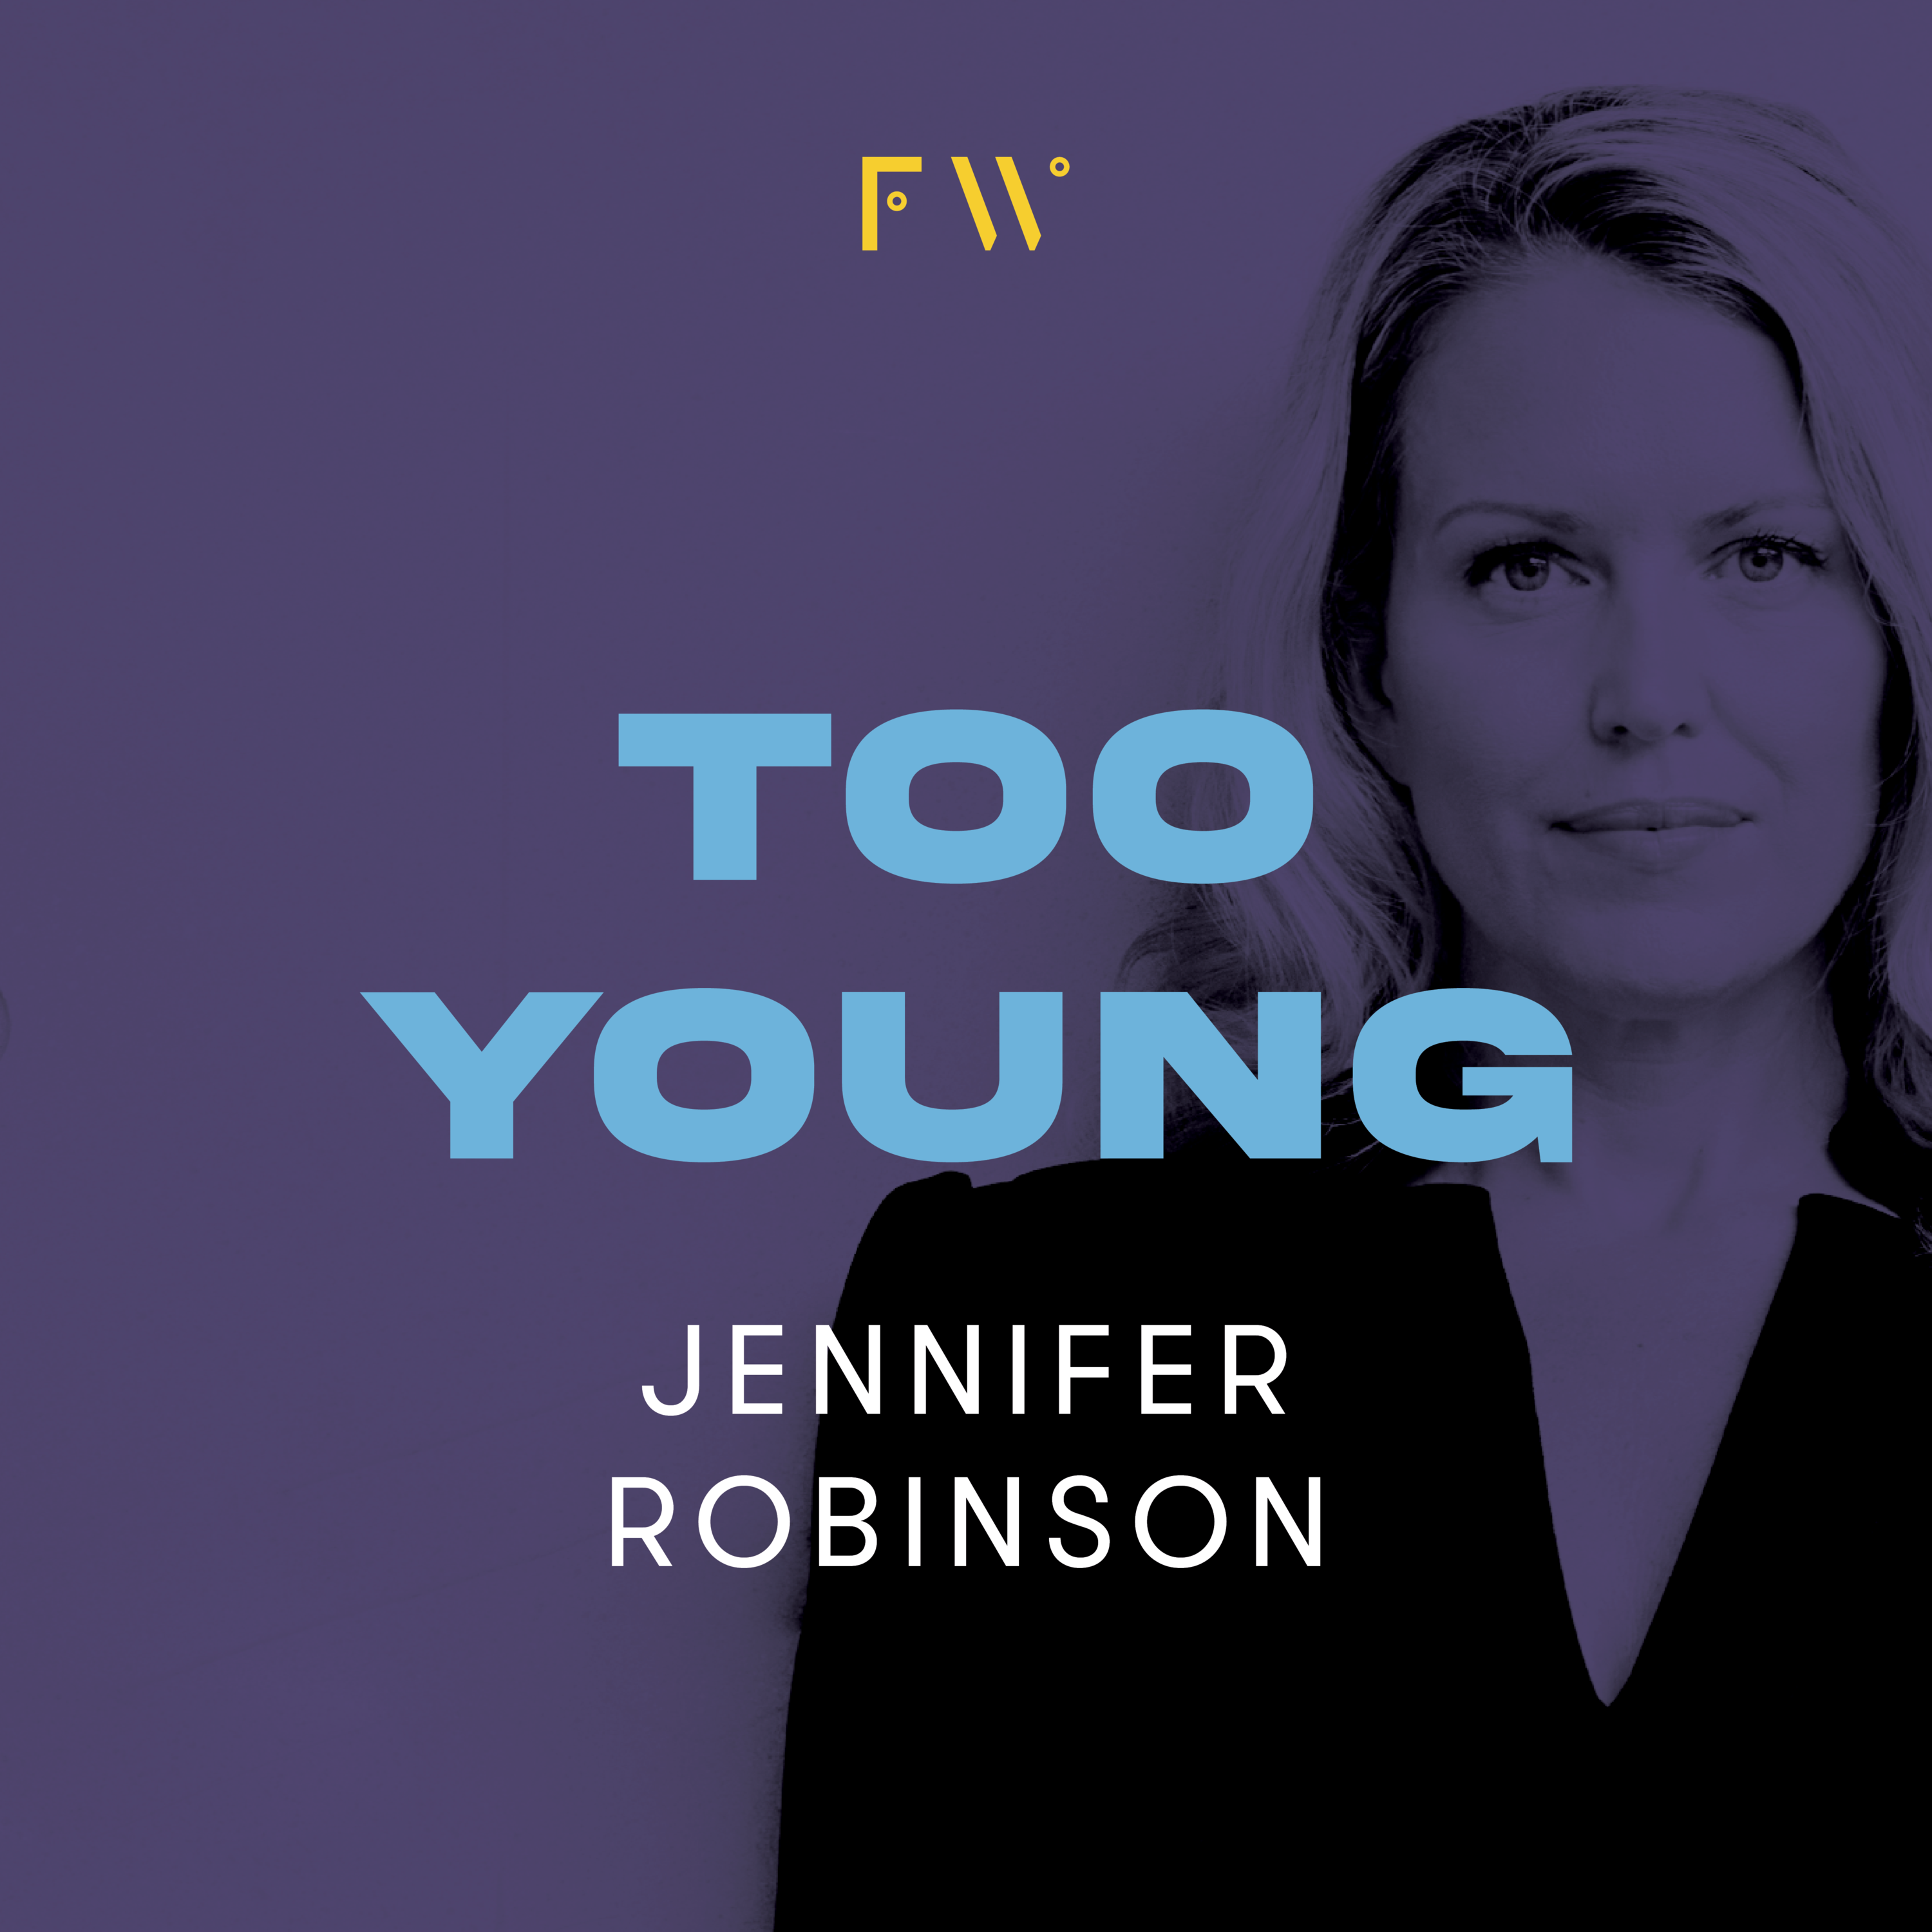 1. Jennifer Robinson was "too young"